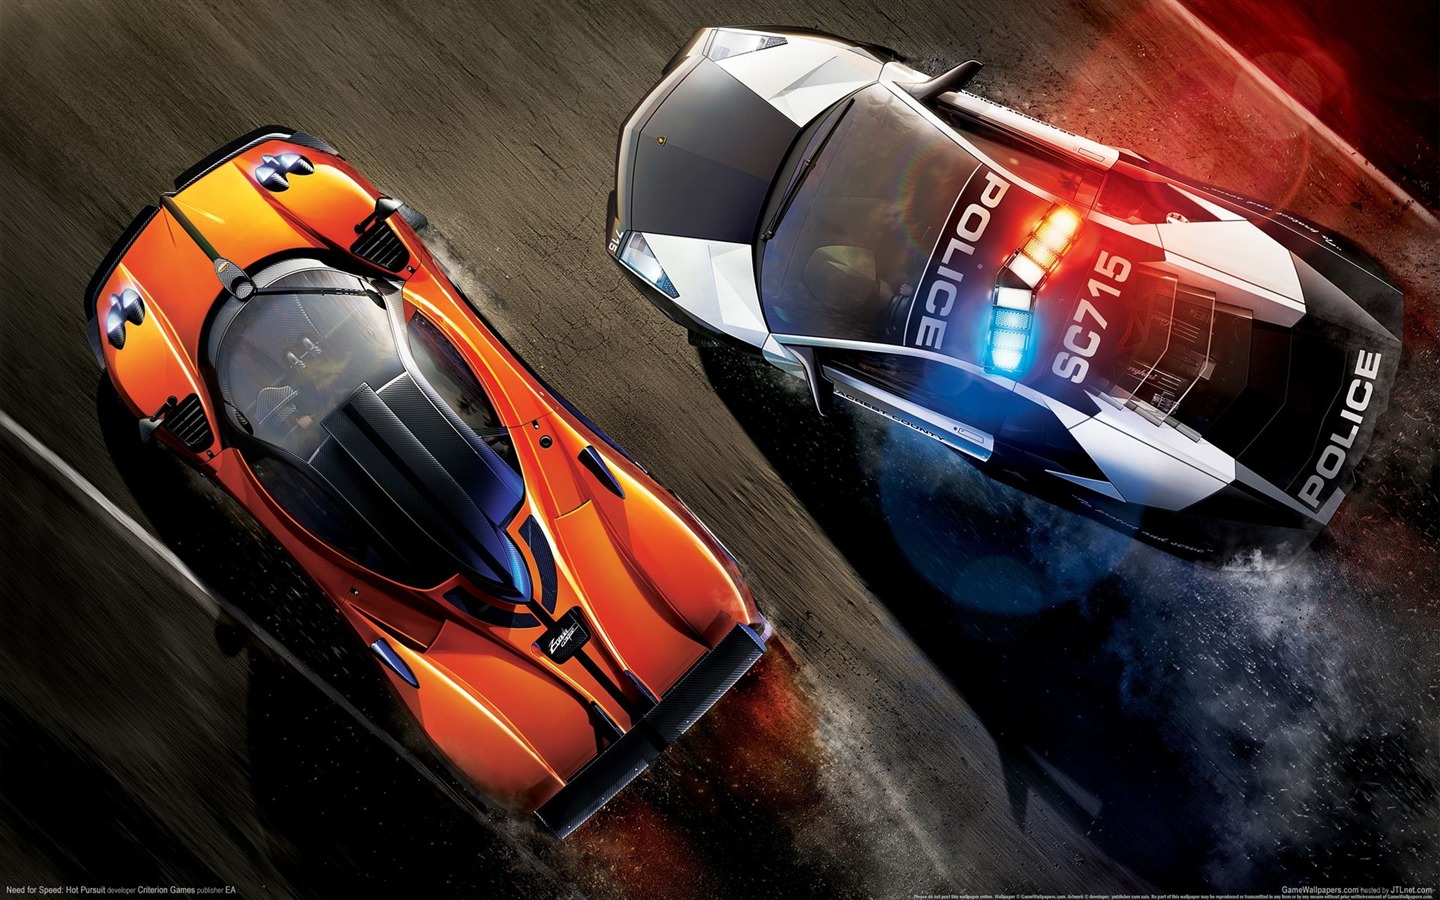 Need for Speed: Hot Pursuit 極品飛車14：熱力追踪 #1 - 1440x900